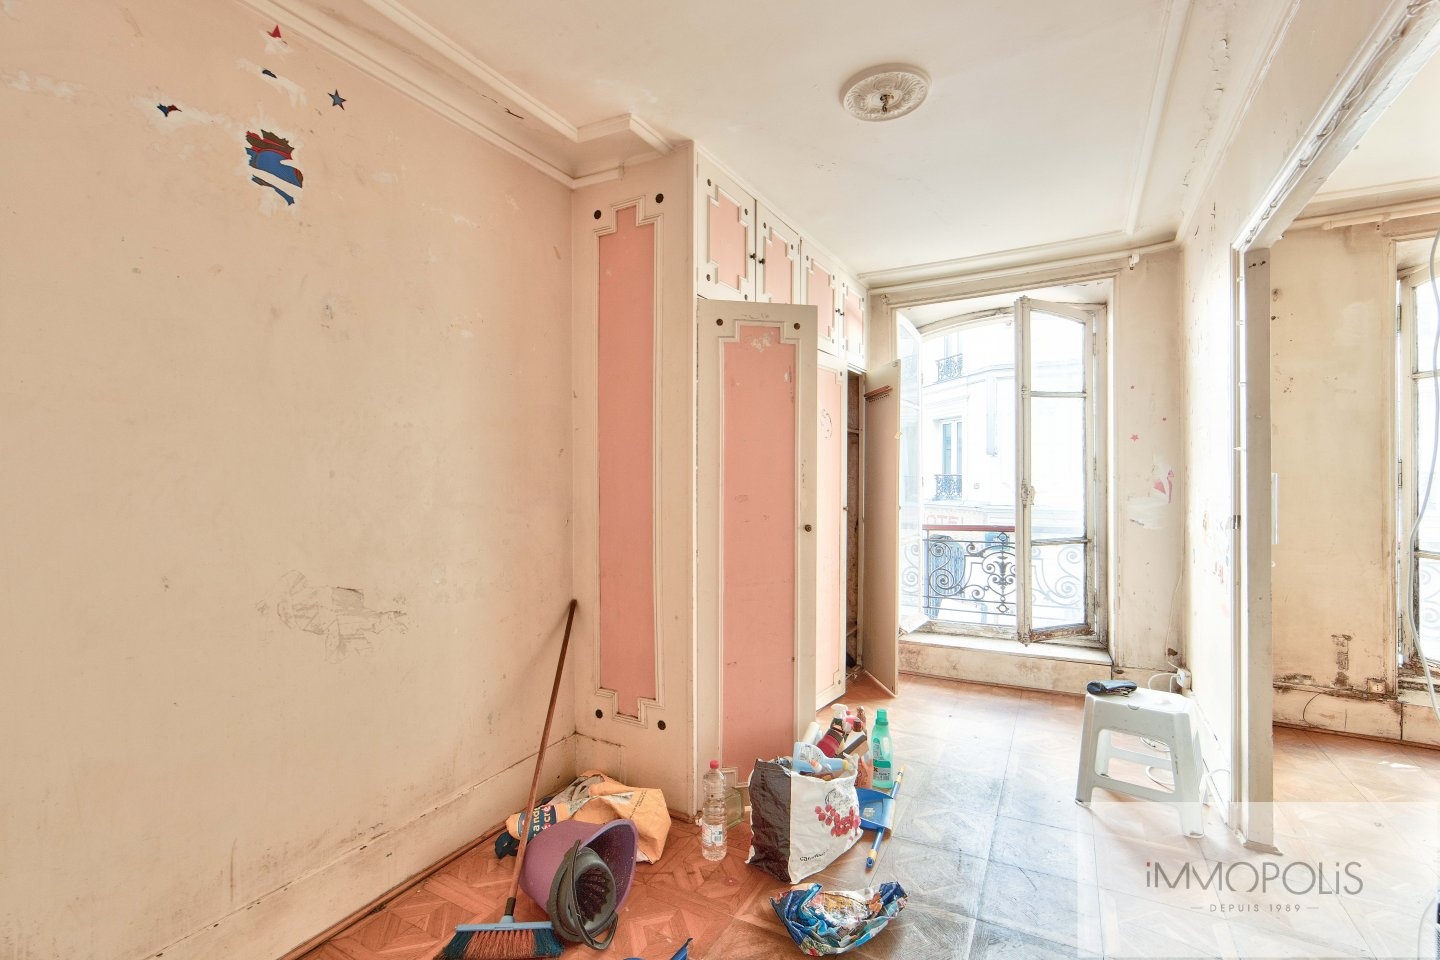 Apartment to be renovated in the heart of the abbesses. 2